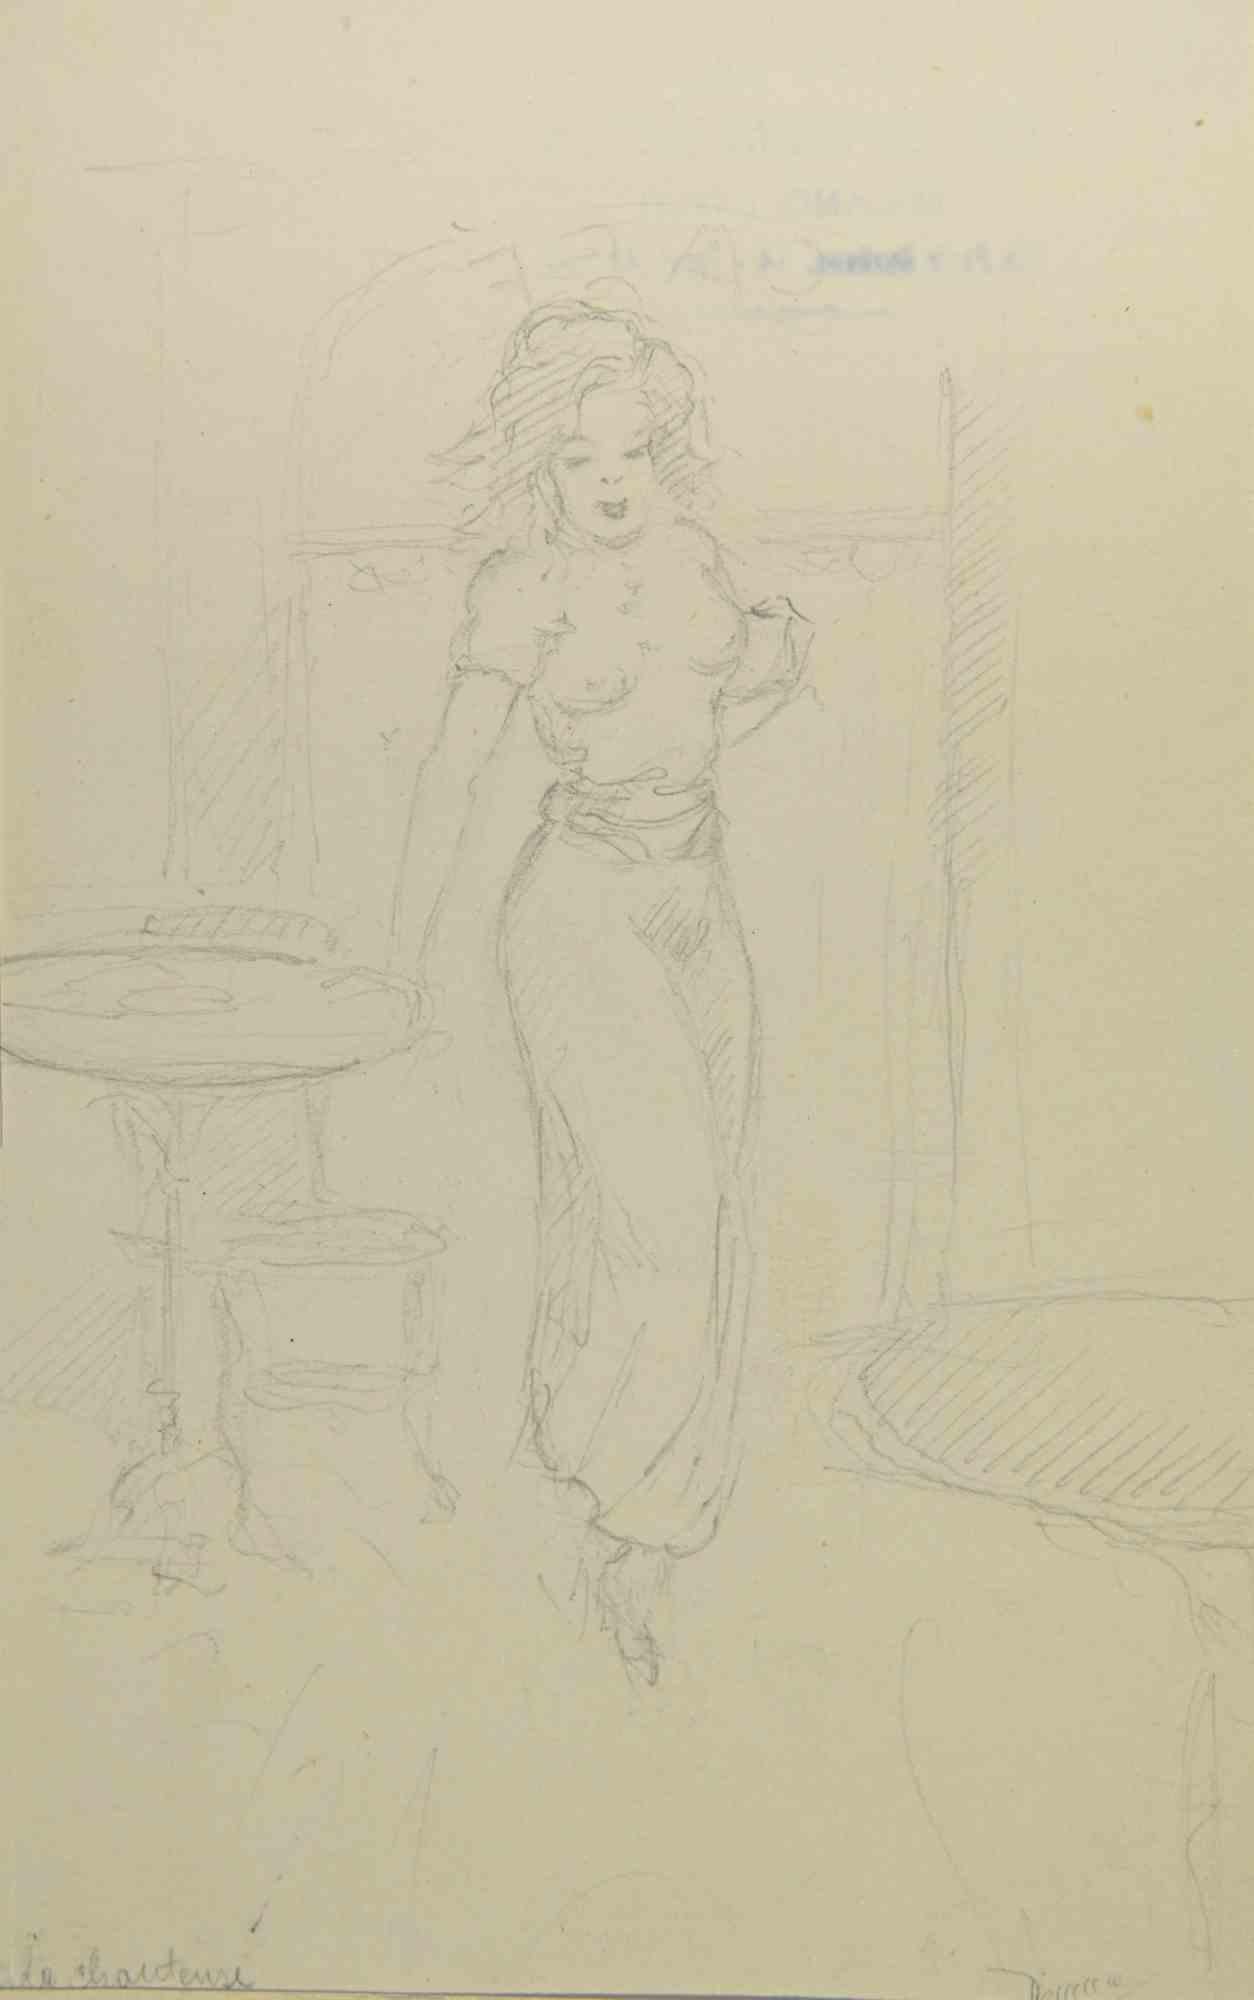 Woman is a Drawing in pencil realized by  Augusto Monari in the Early-20th Century.

Hand-signed on the lower.

Good conditions, including a creamy-colored Passepartout.

The artwork is depicted through confident strokes in a well-balanced